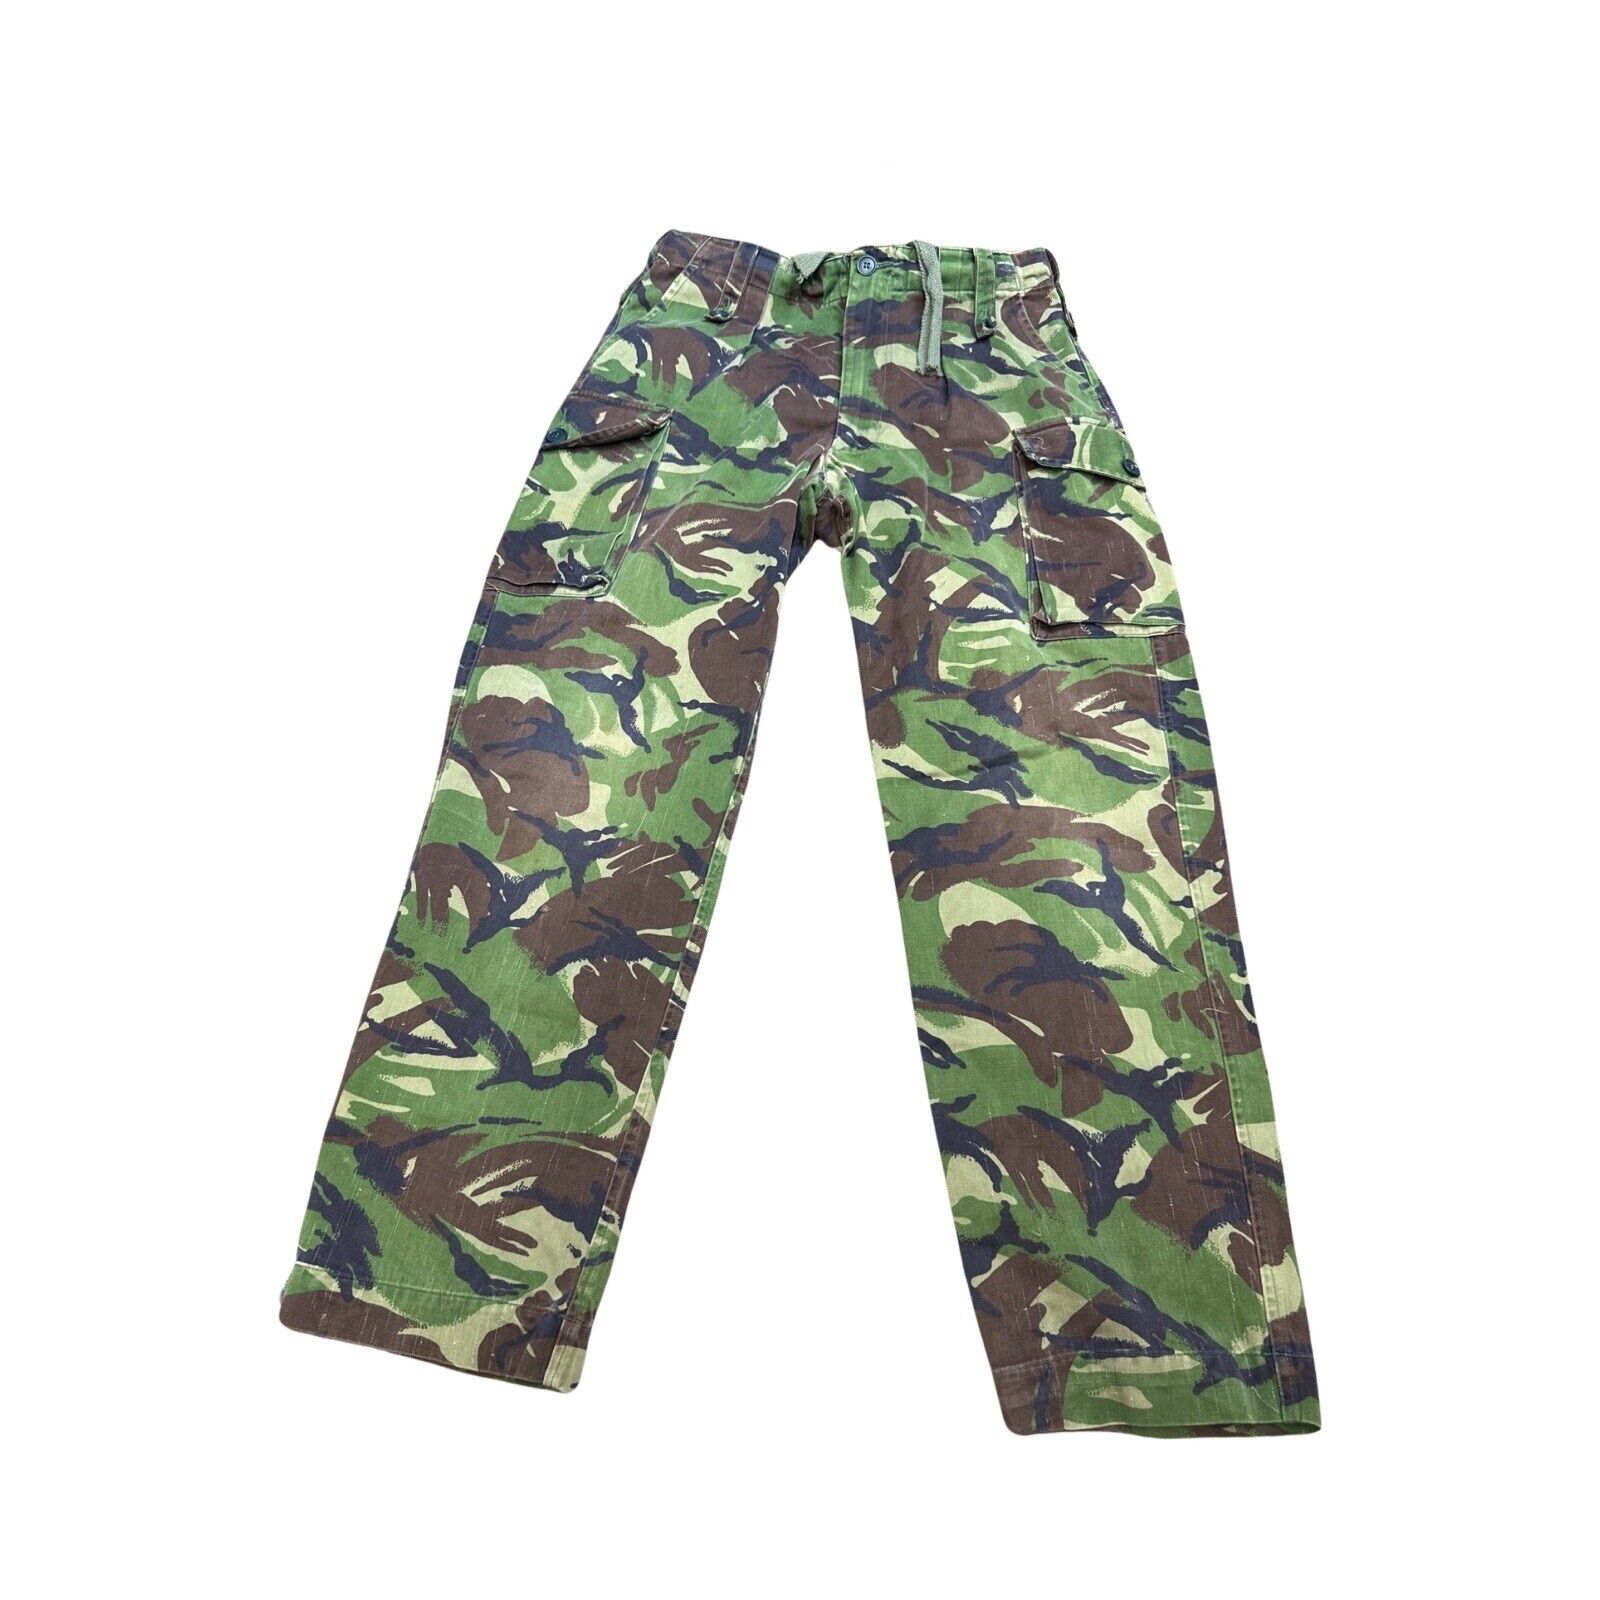 VTG British Army Combat Trousers Pants Cargo Camouflage Pants Size 30x30